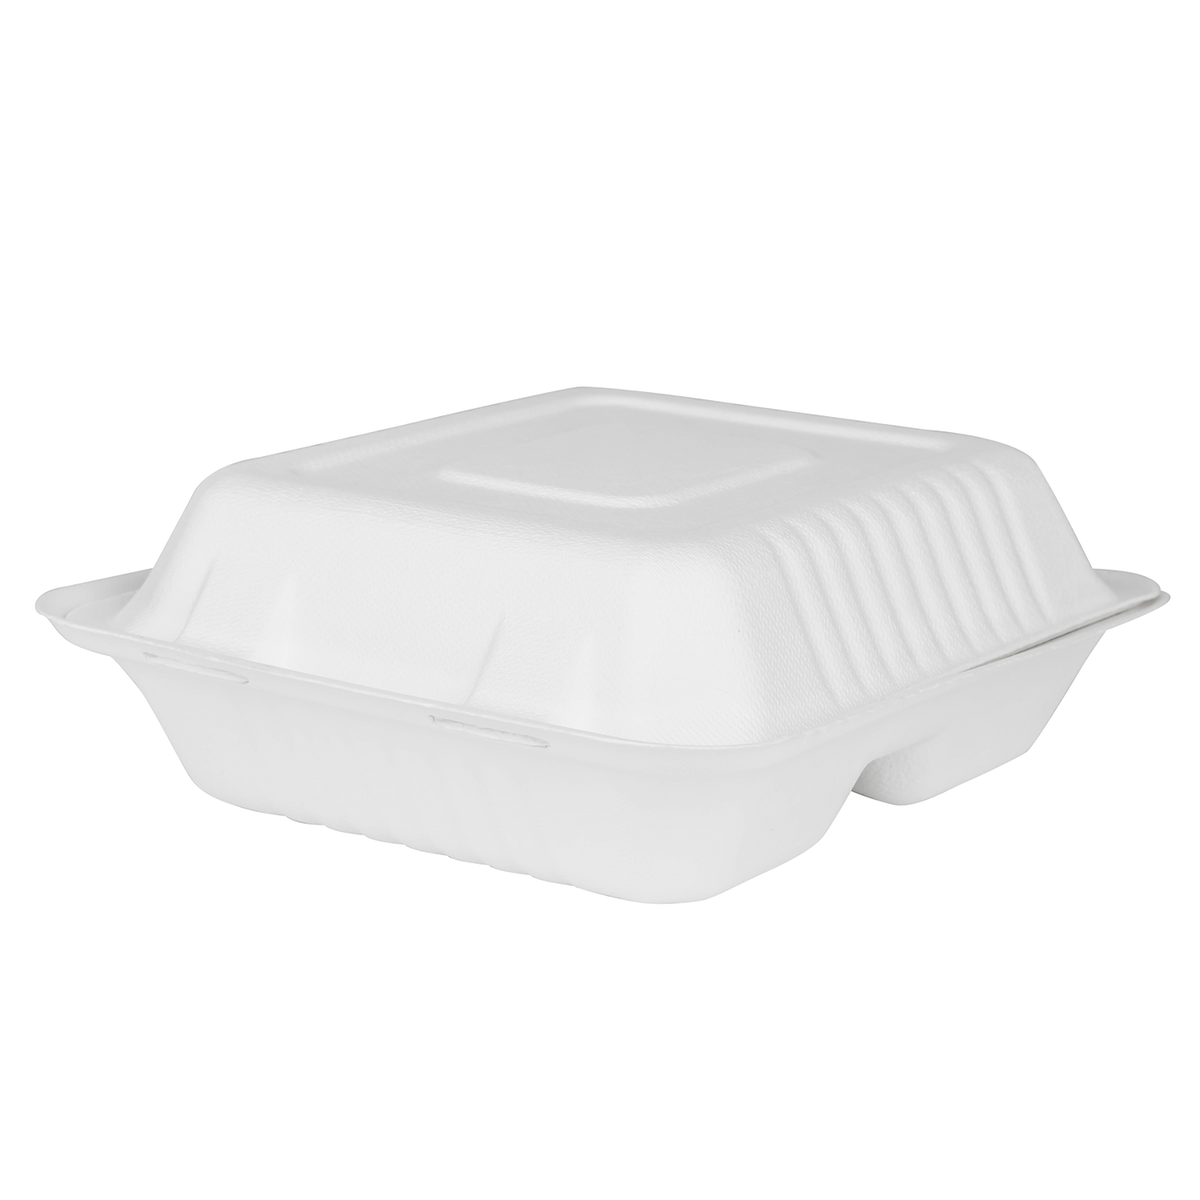 100% Compostable Clamshell Take Out Food Containers [8X8 3-Compartment 50-Pack]